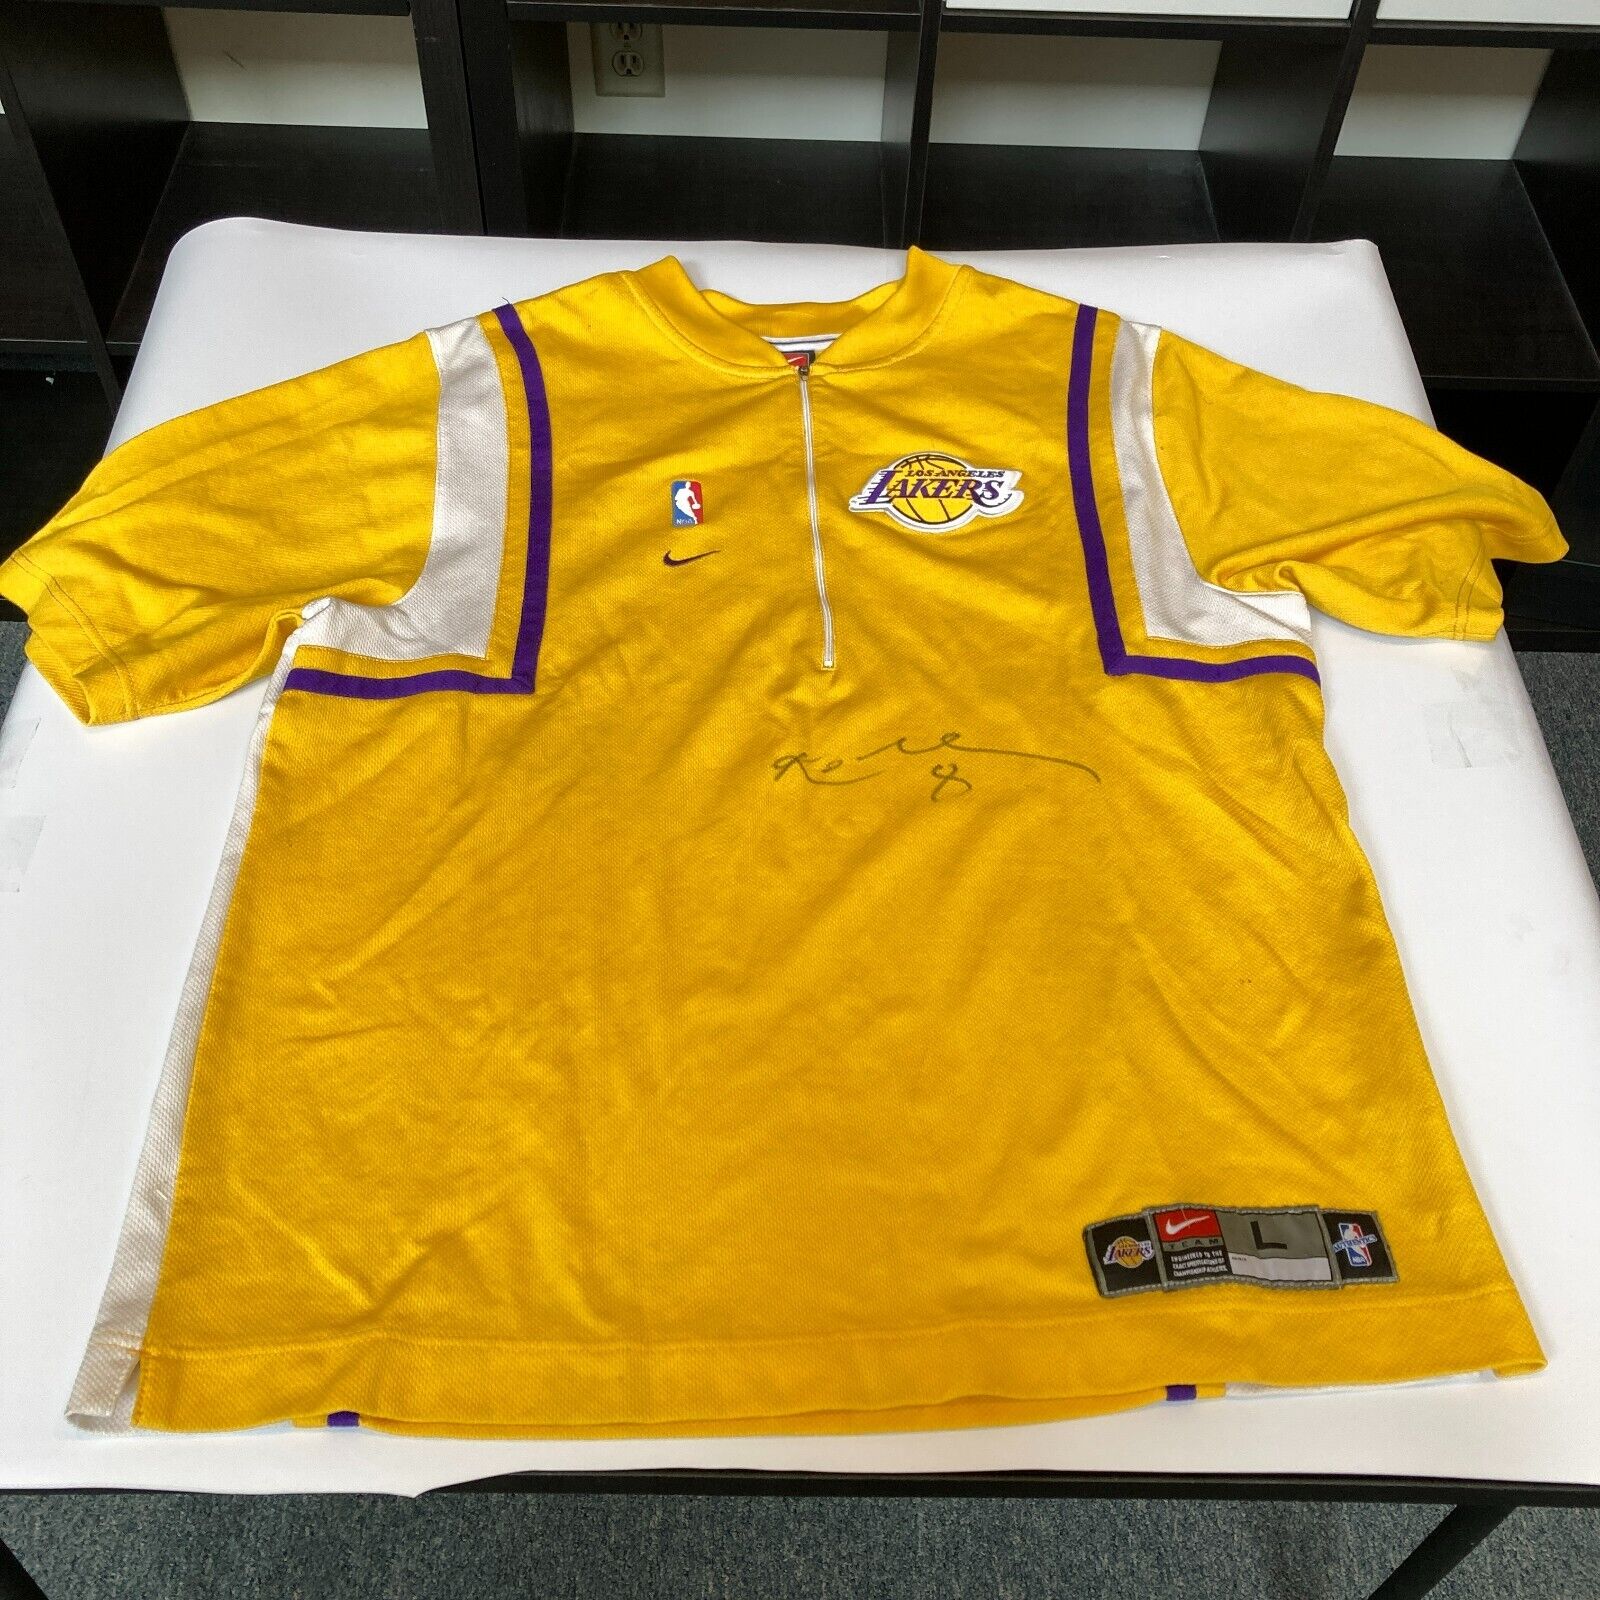 Authentic NBA/Nike Vintage Lakers Shoot Around Shirt for Sale in